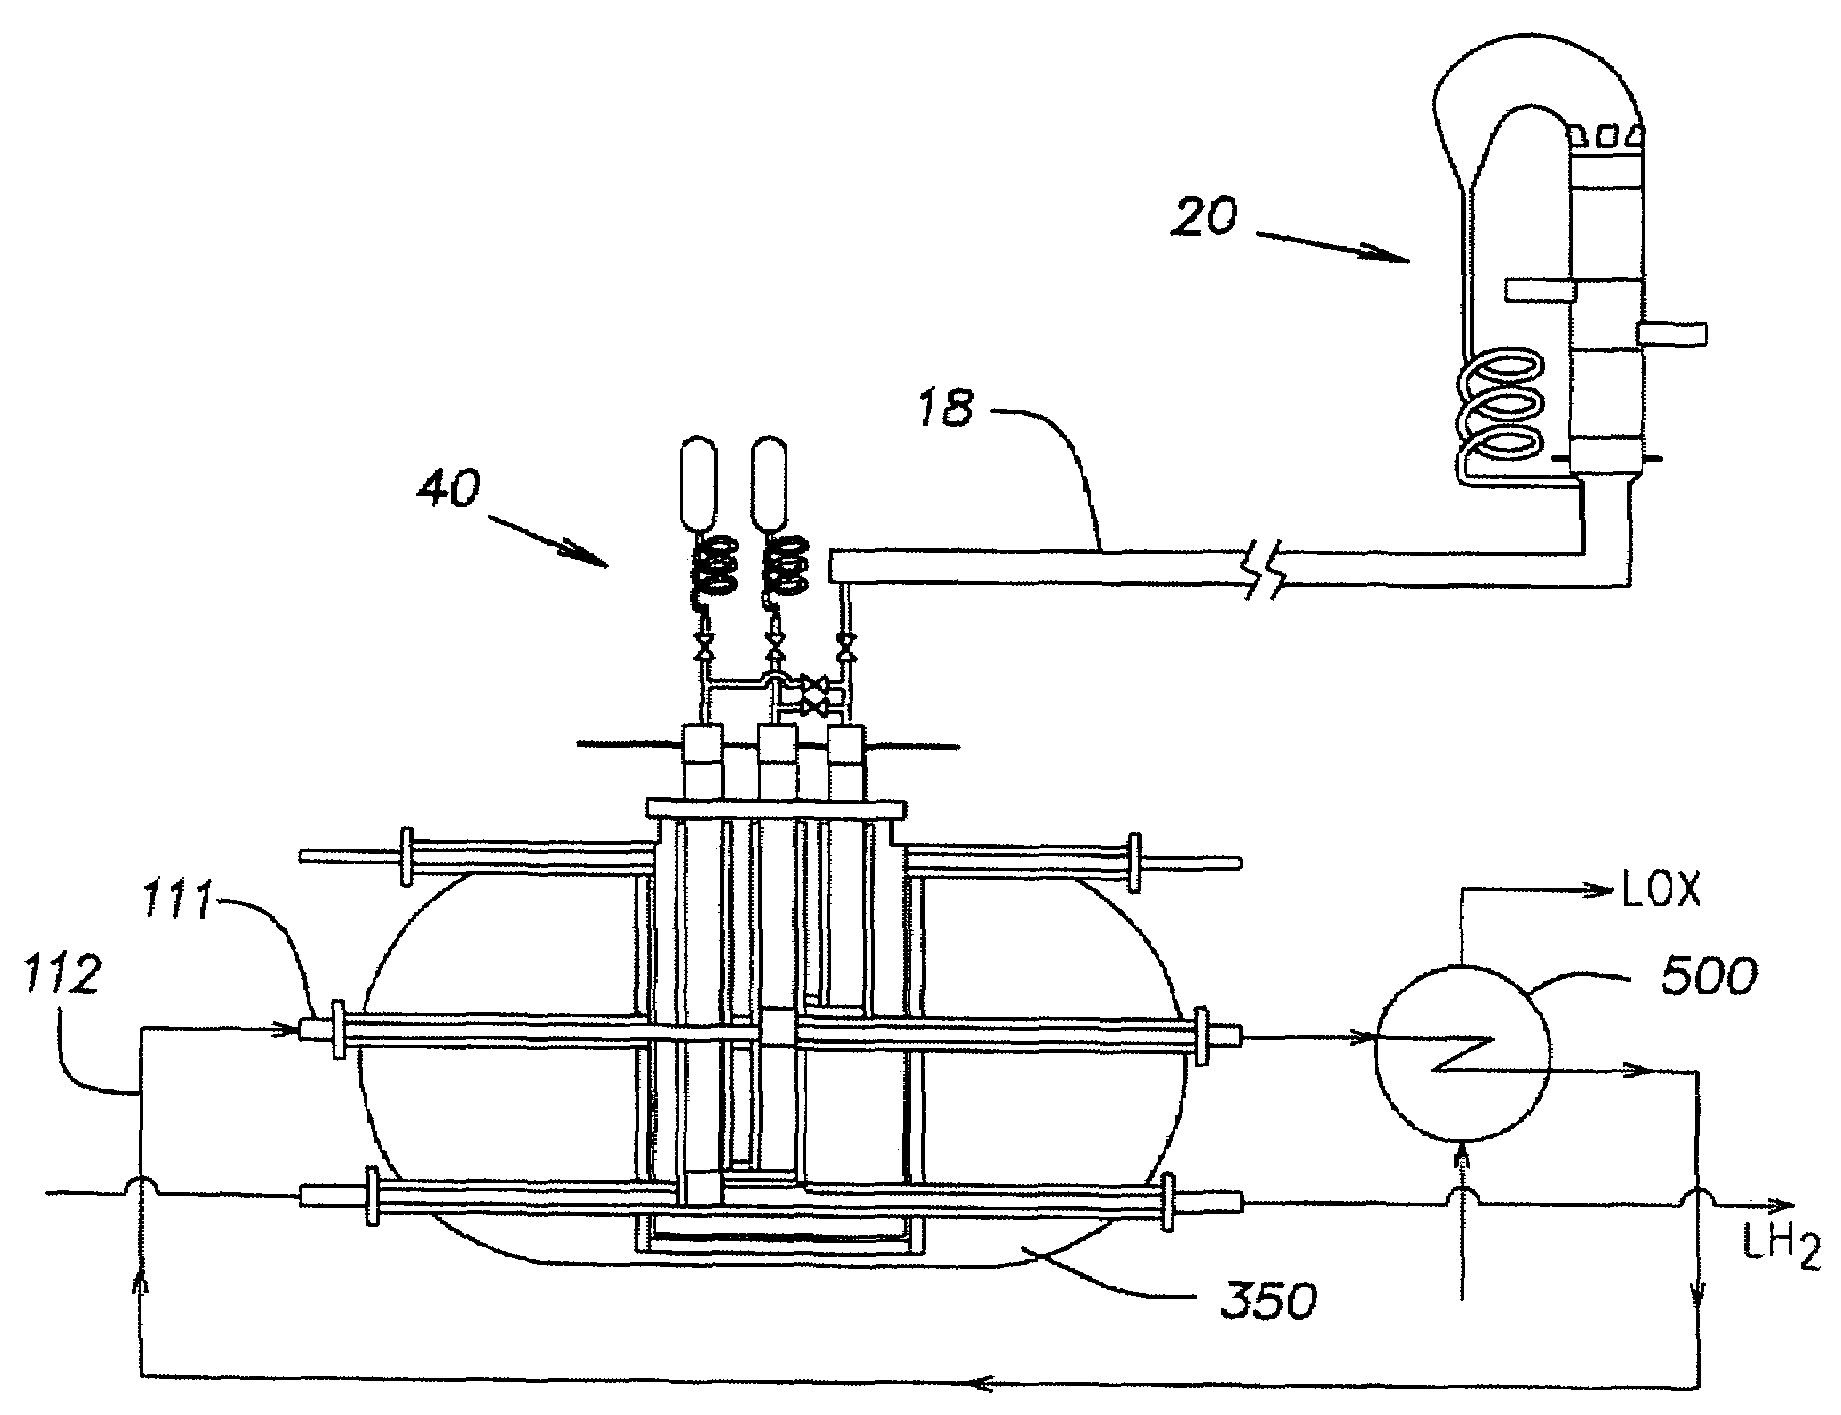 Densifier for simultaneous conditioning of two cryogenic liquids